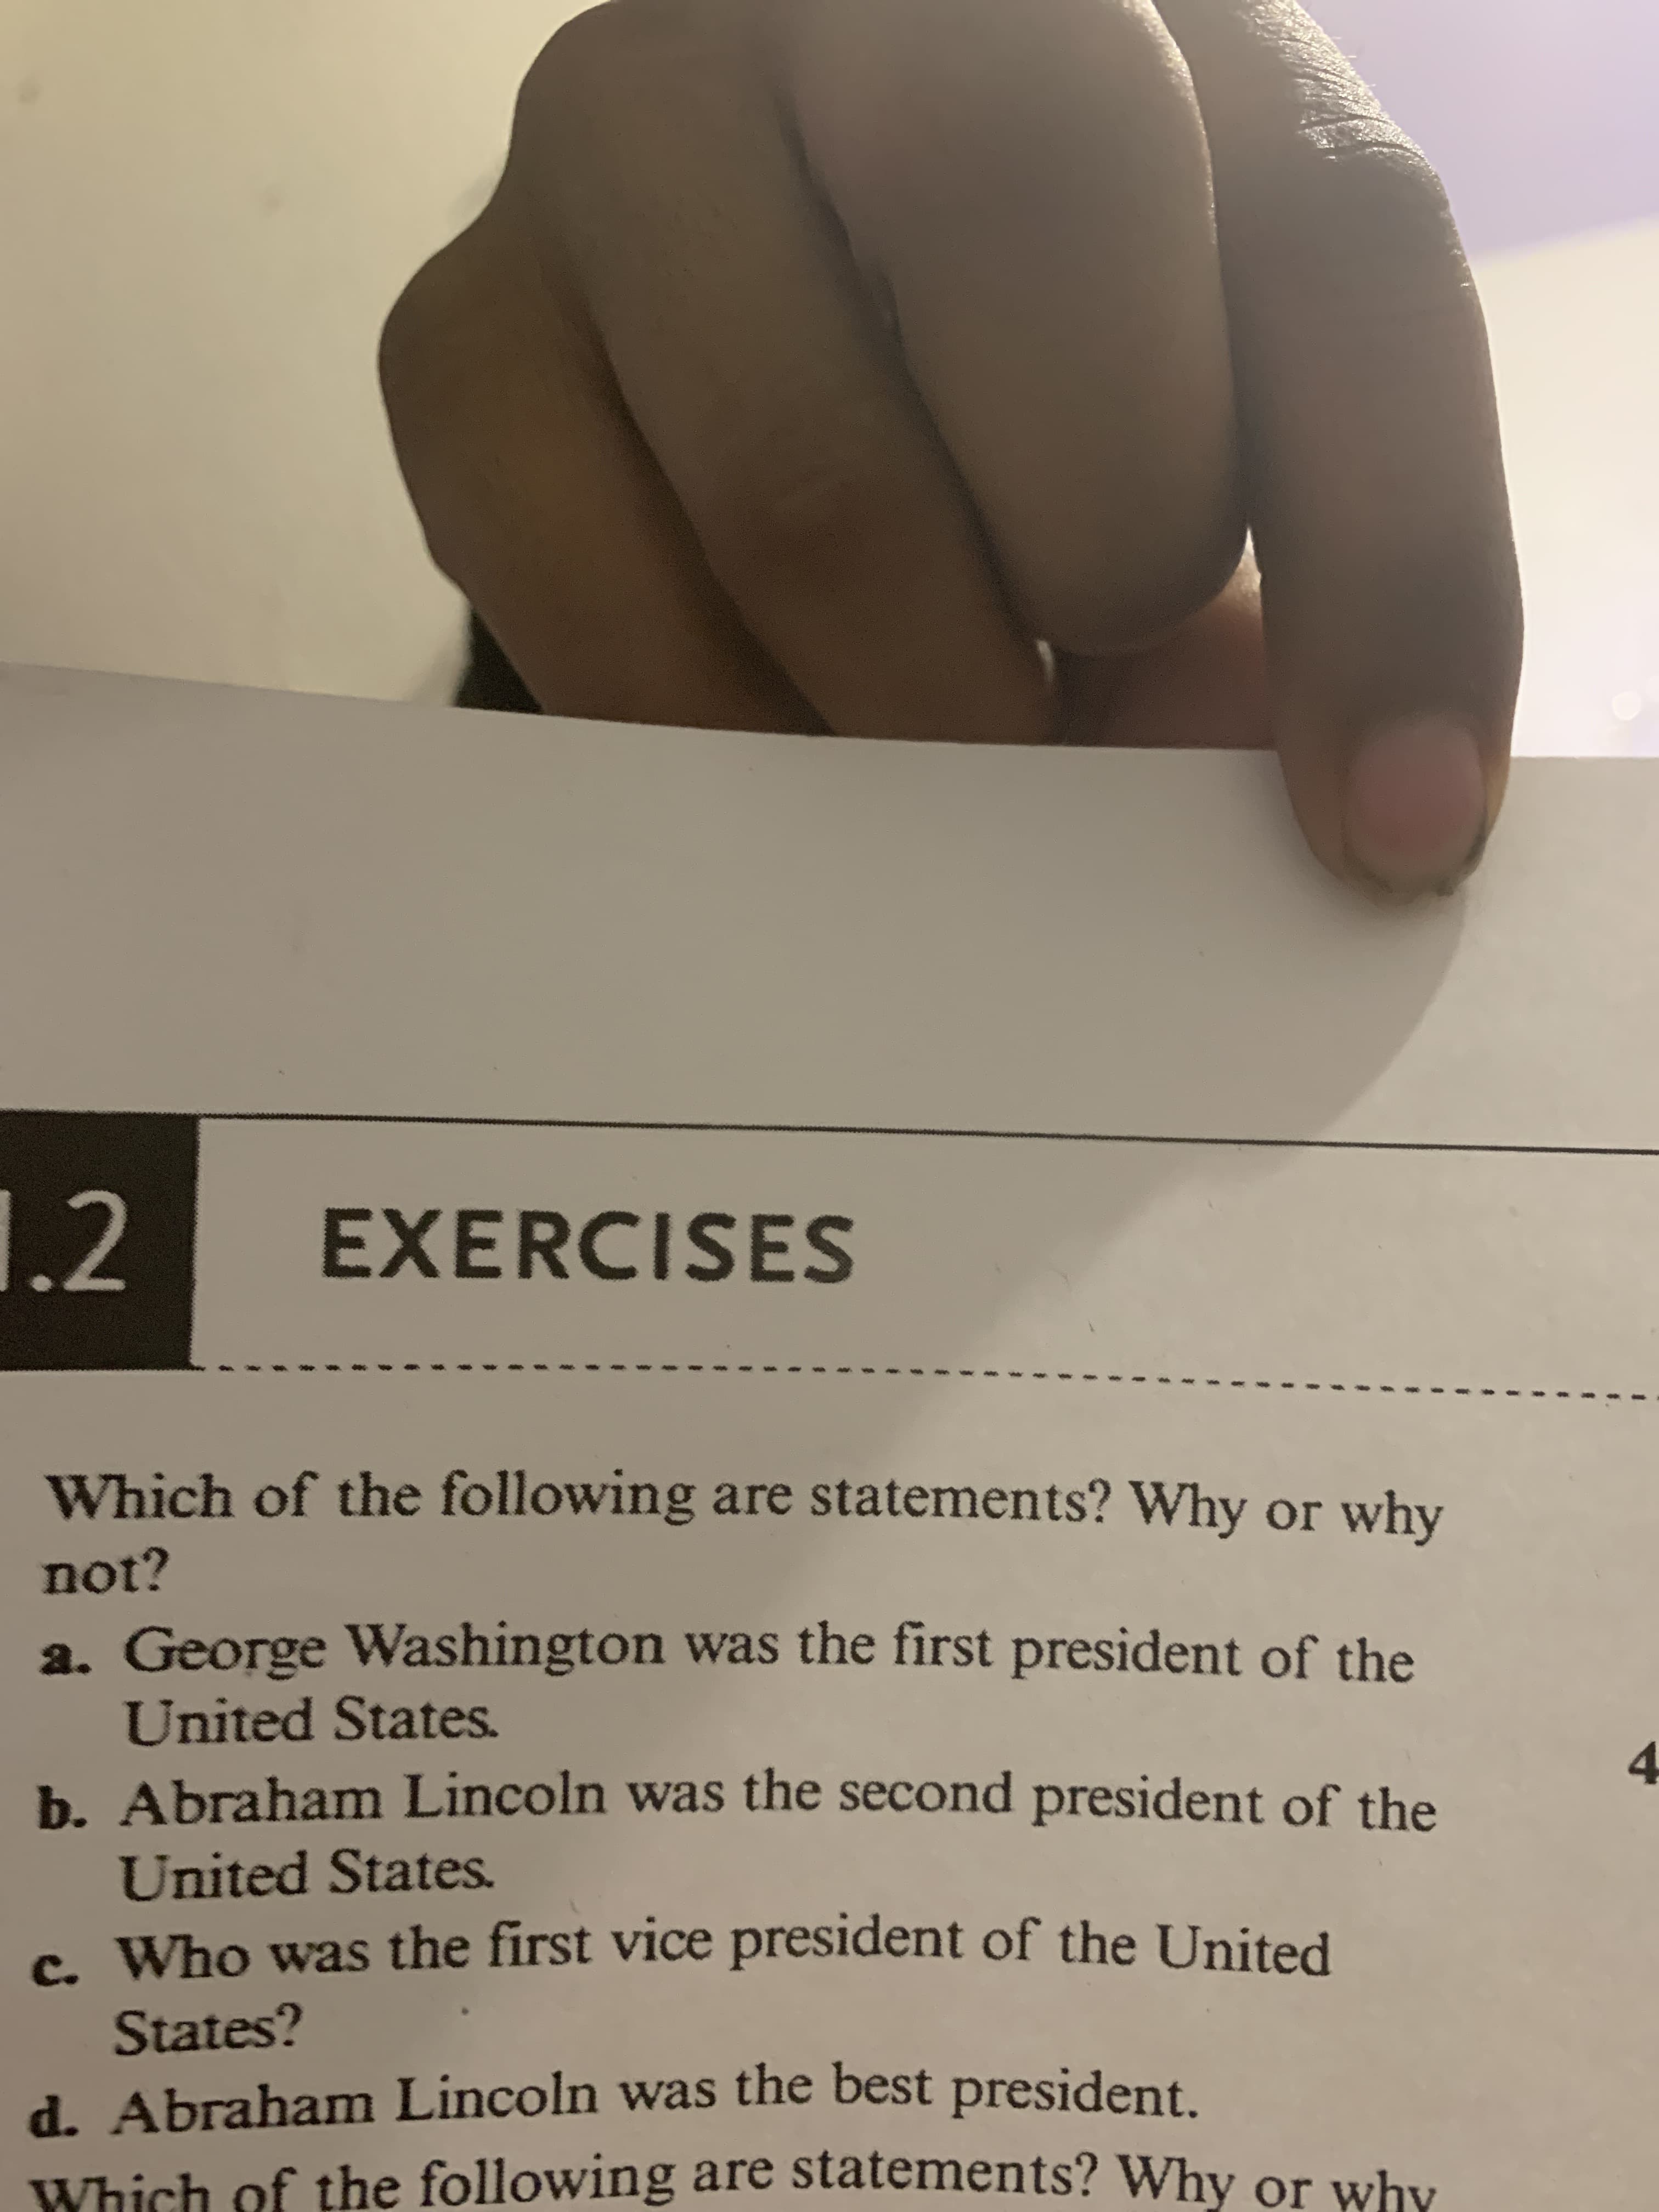 1.2
EXERCISES
Which of the following are statements? Why or why
not?
a. George Washington was the first president of the
United States.
4.
b. Abraham Lincoln was the second president of the
United States.
c Who was the first vice president of the United
States?
d. Abraham Lincoln was the best president.
Which of the following are statements? Why or why
